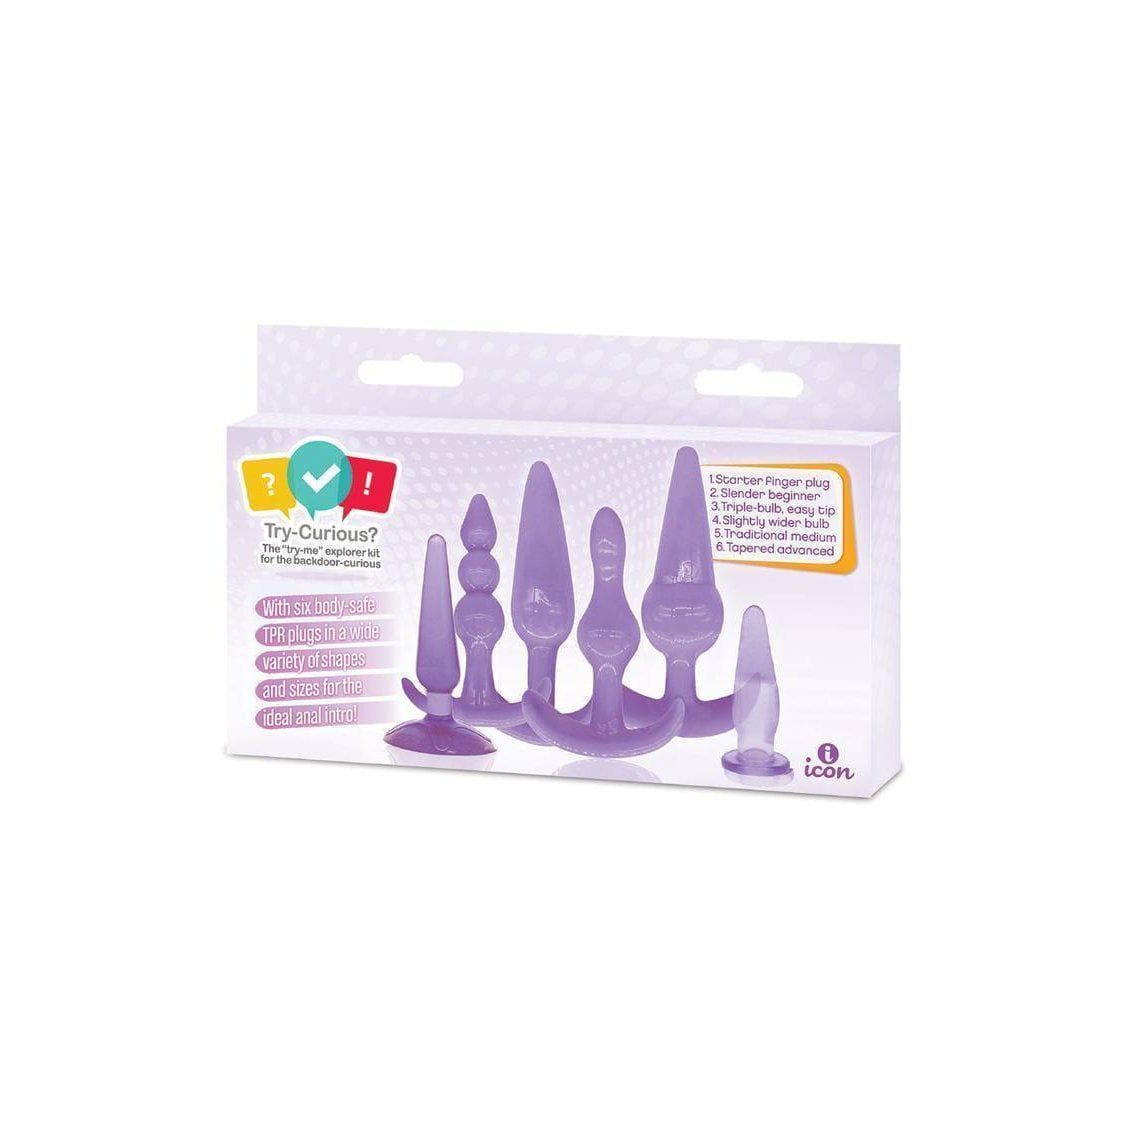 Try-Curious Anal Butt Plug Play Six Piece Starter Kit for Men and Women - Romantic Blessings